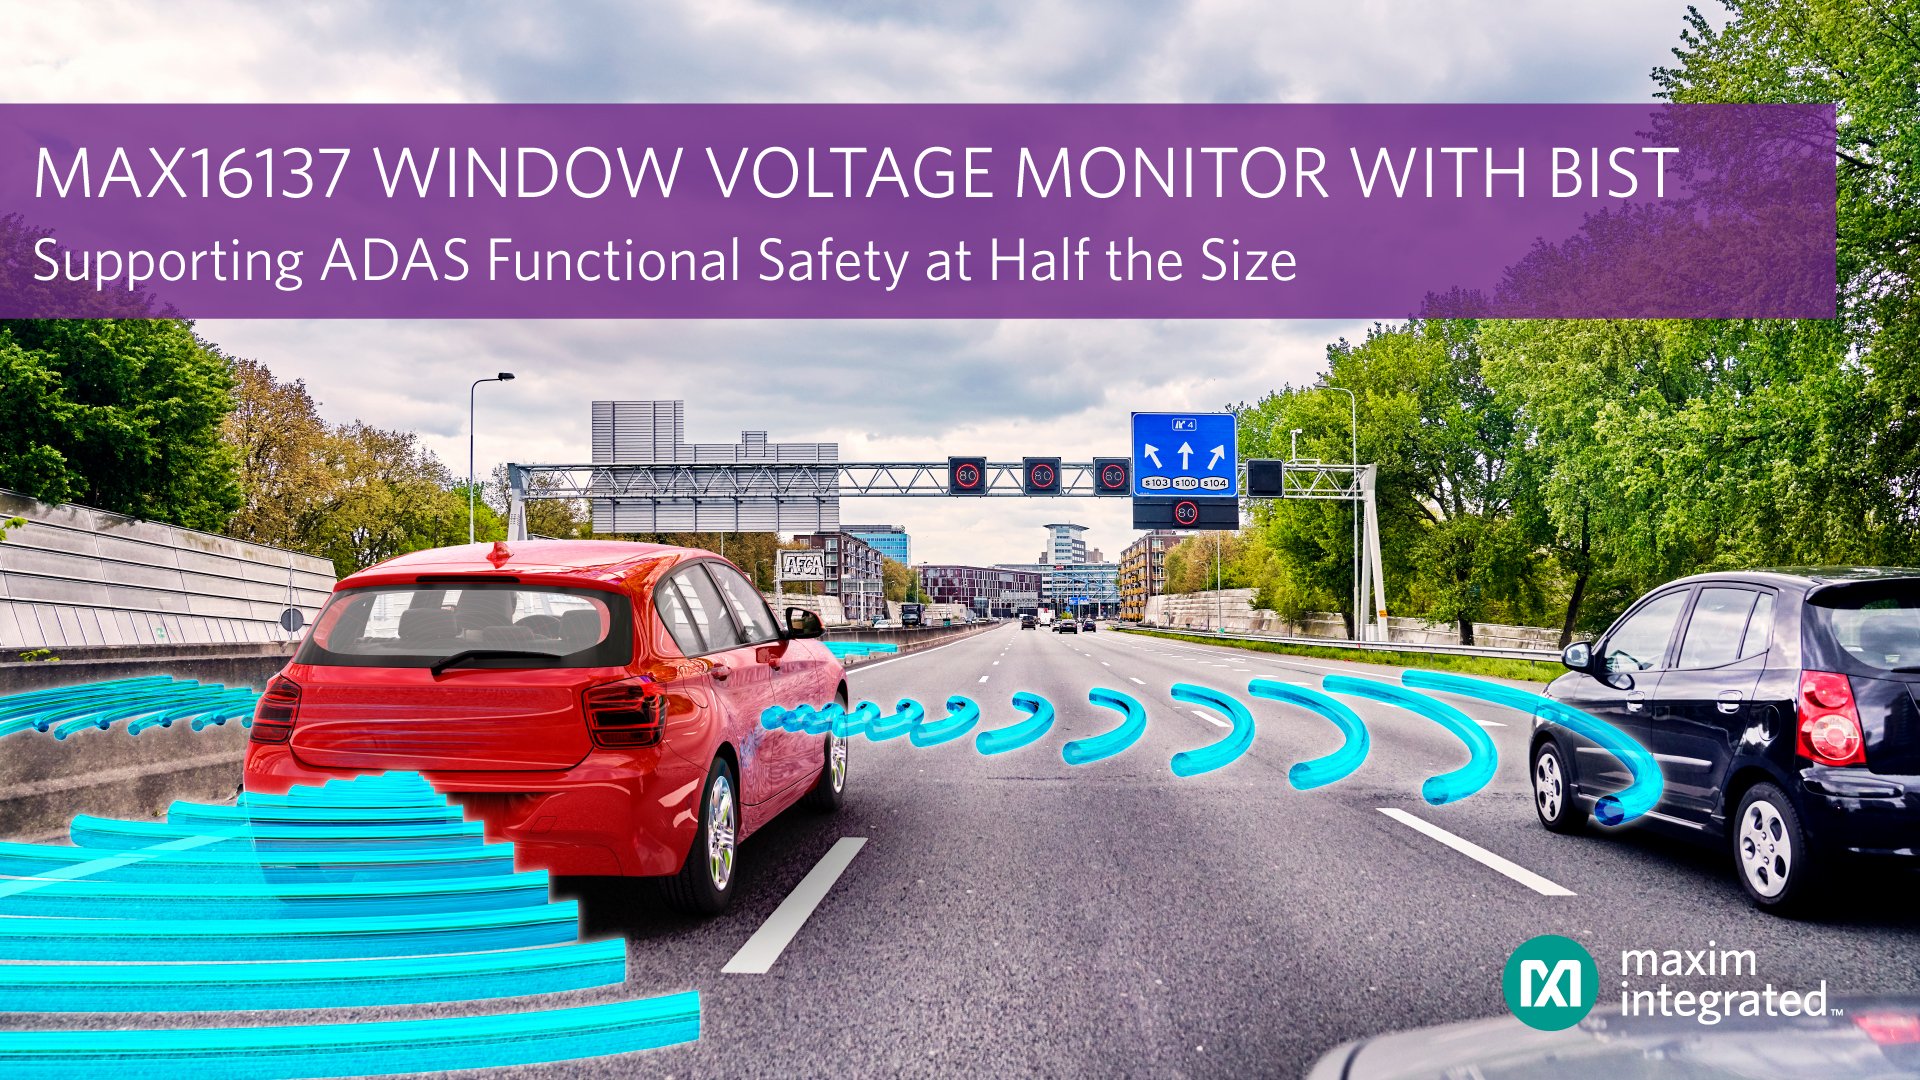 First Automotive Window Voltage Monitor with Built-In Self-Test